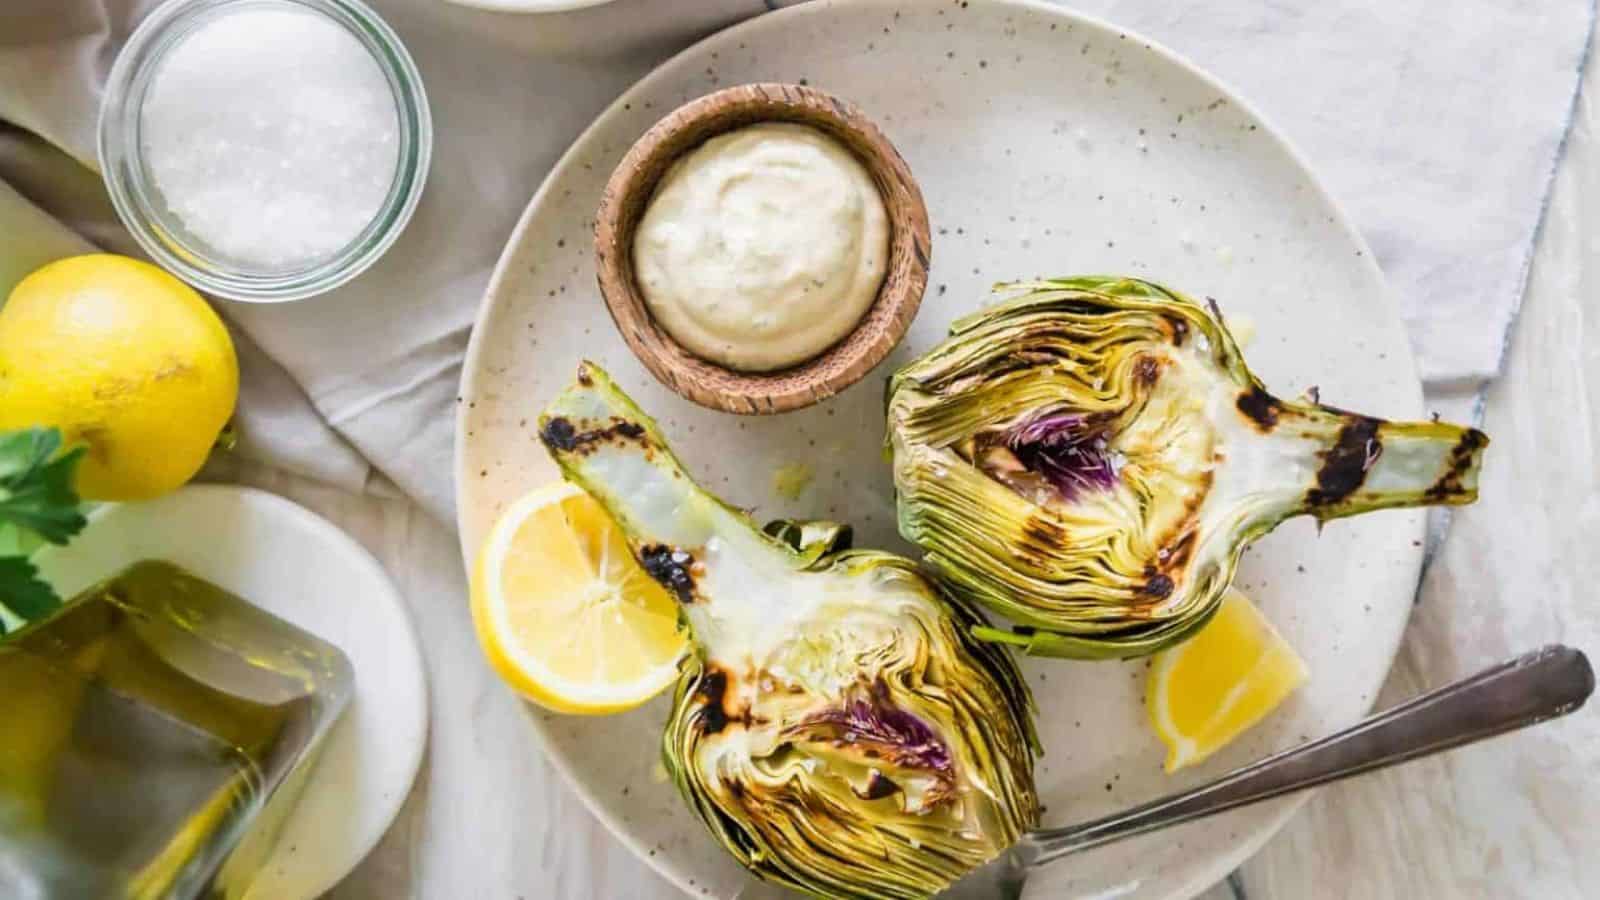 Overhead image of grilled artichokes with a dip and lemon slices on a plte.